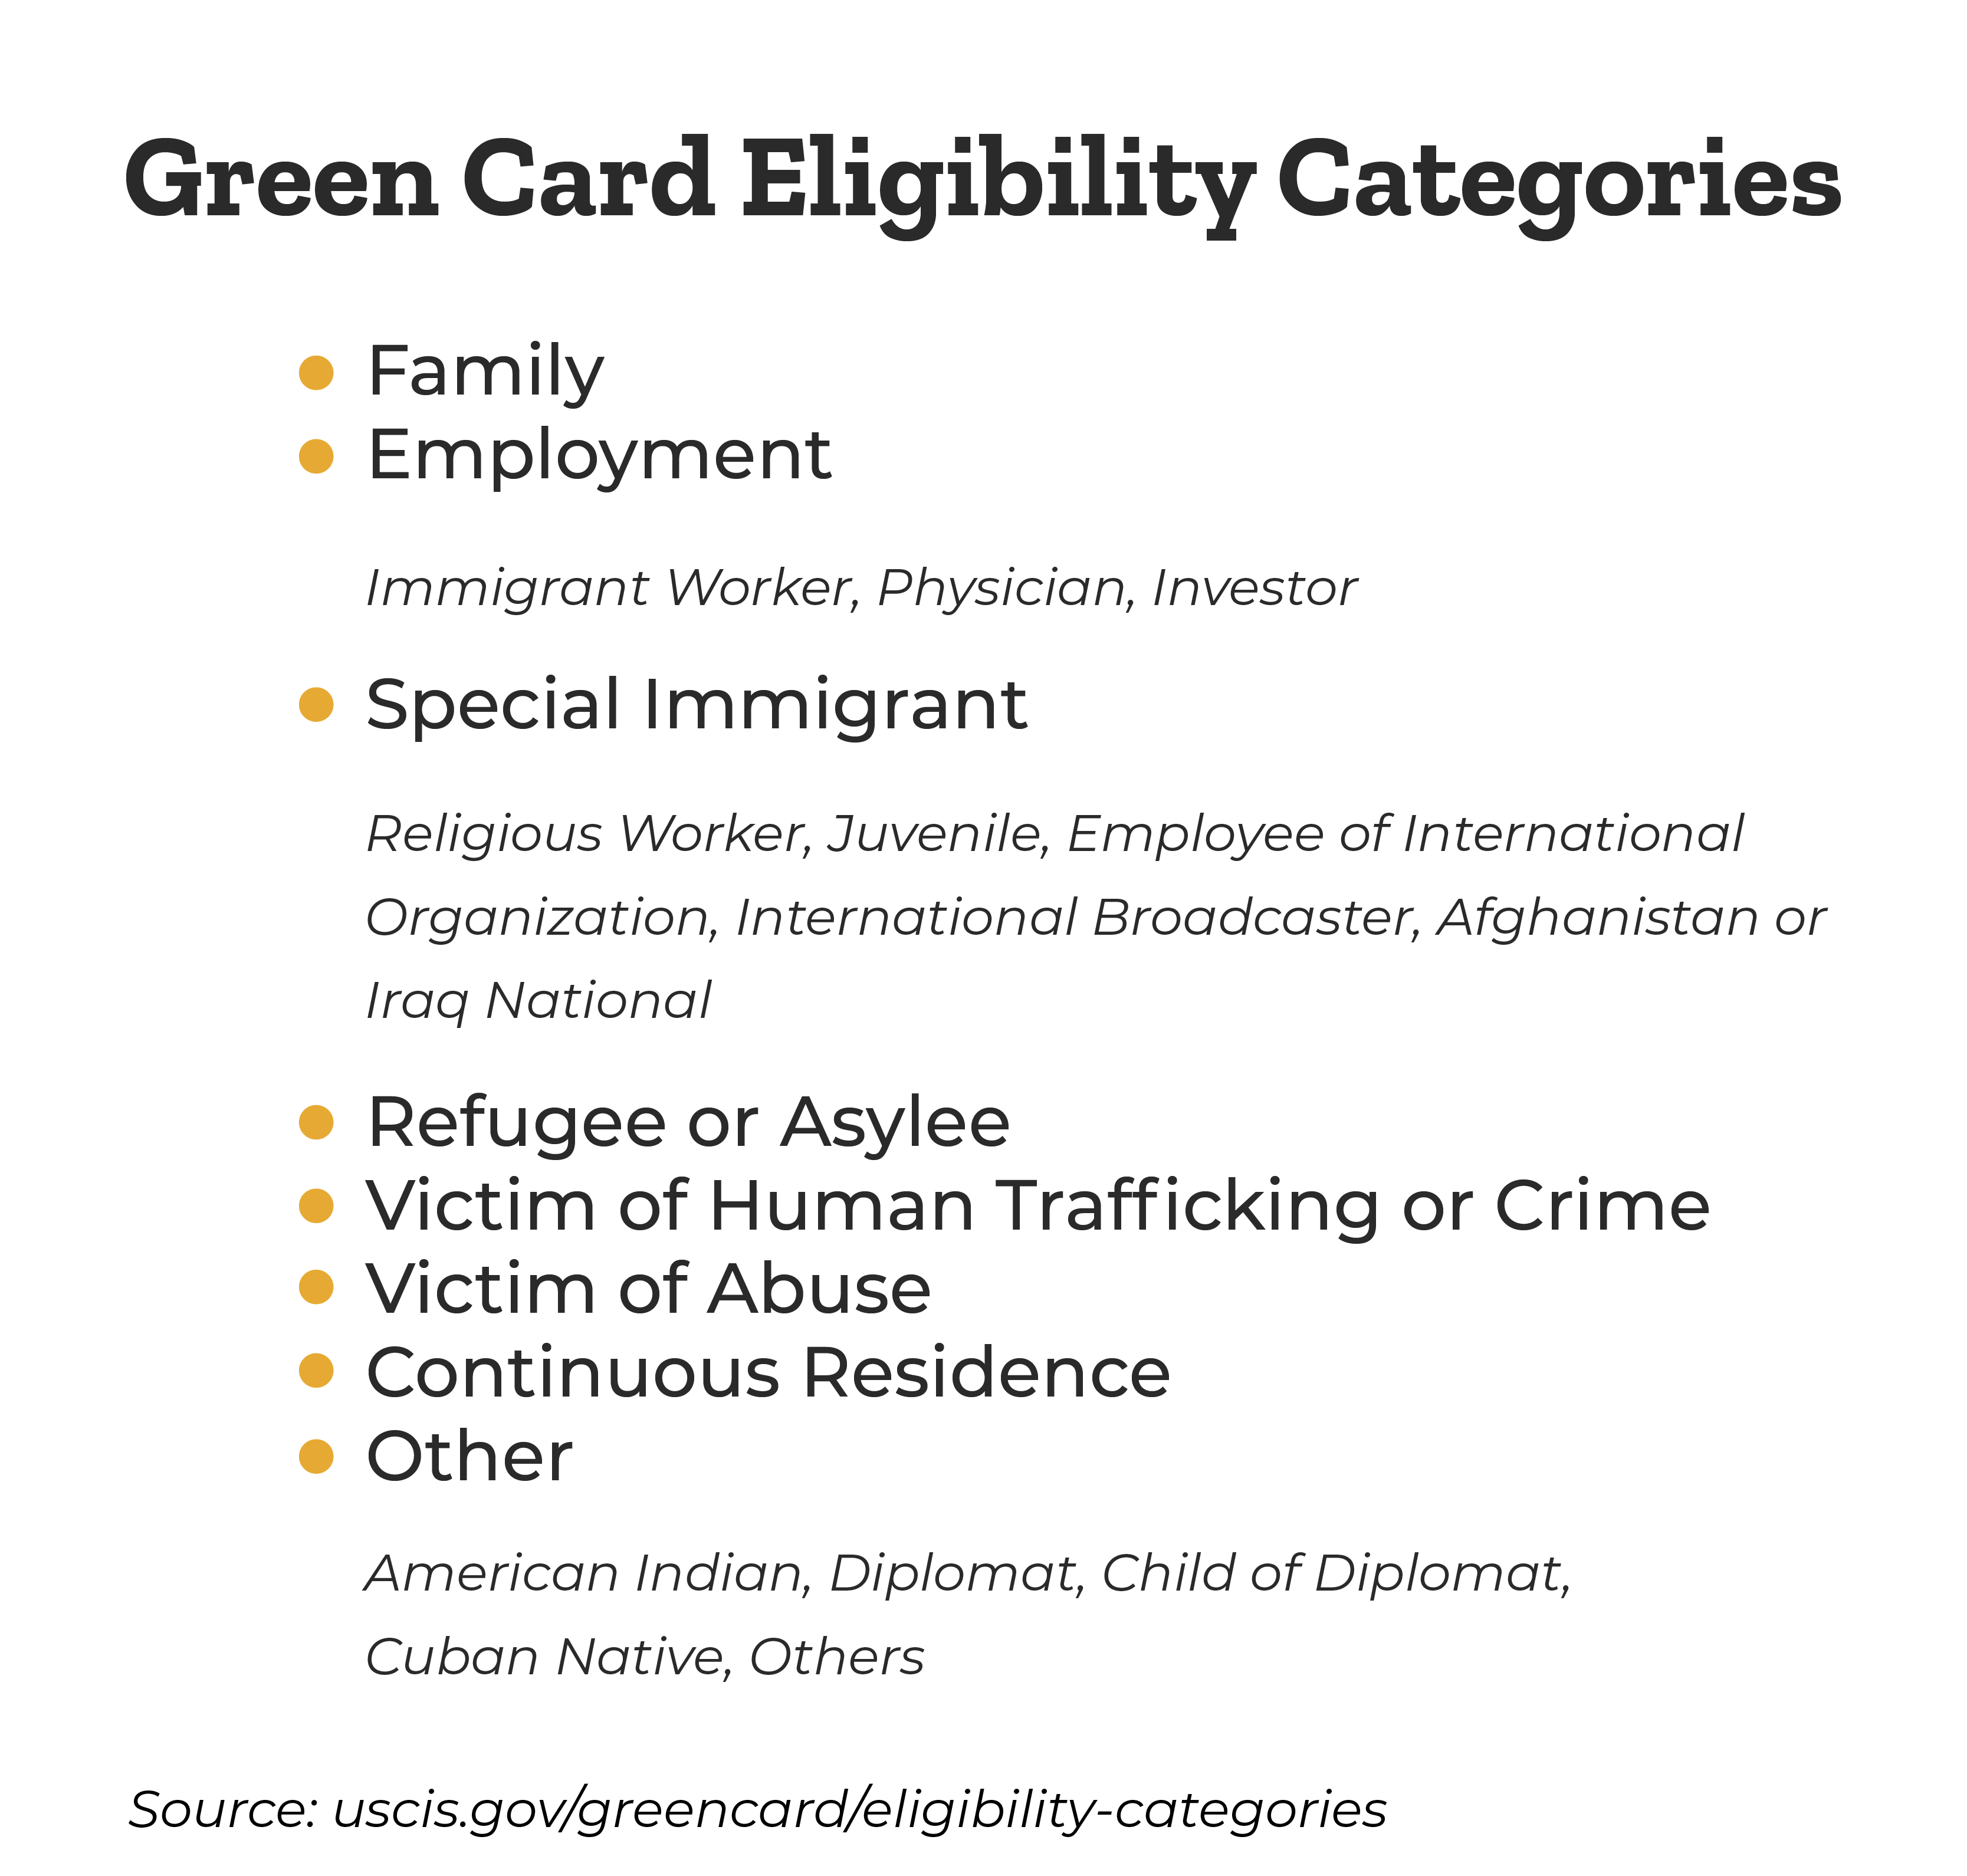 Green Card Eligibility Categories -  Family, Employment, Special Immigration, Refugee or Asylee, Victim of Human Trafficking or Crime, Victim of Abuse, Continuous Residence, Other